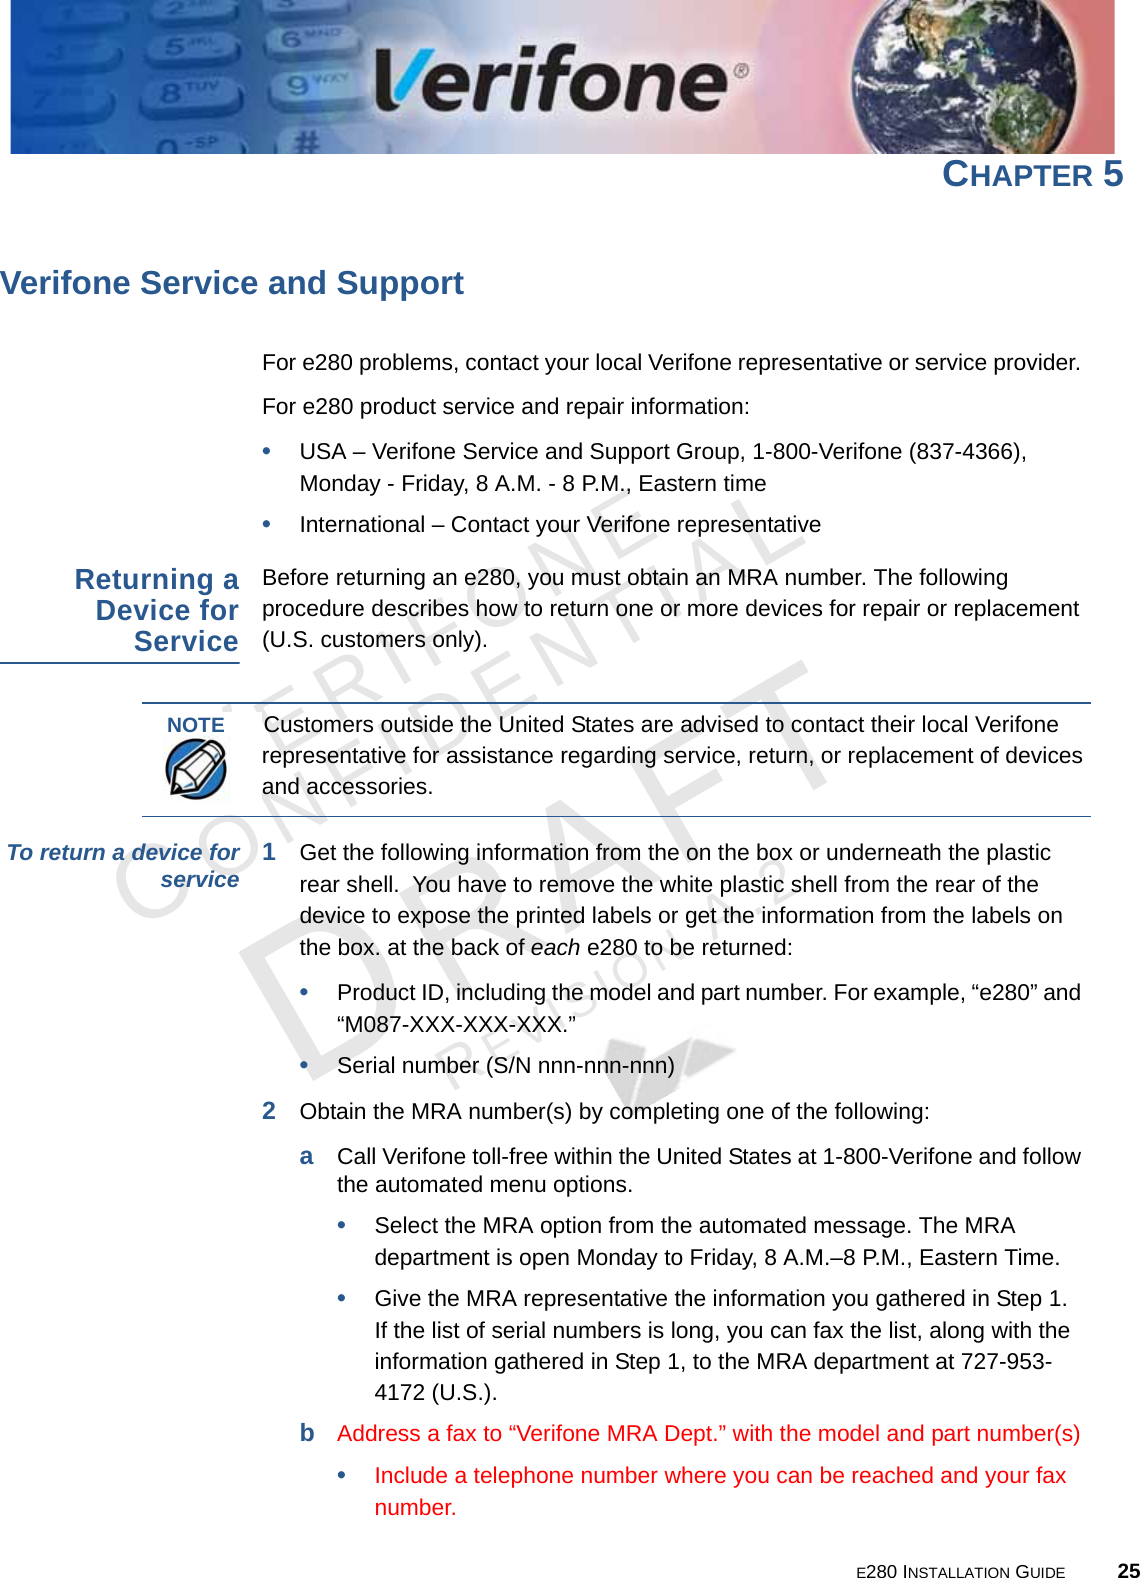 E280 INSTALLATION GUIDE 25VERIFONECONFIDENTIALREVISION A.2 CHAPTER 5Verifone Service and SupportFor e280 problems, contact your local Verifone representative or service provider. For e280 product service and repair information:•USA – Verifone Service and Support Group, 1-800-Verifone (837-4366),  Monday - Friday, 8 A.M. - 8 P.M., Eastern time•International – Contact your Verifone representative Returning a Device for ServiceBefore returning an e280, you must obtain an MRA number. The following procedure describes how to return one or more devices for repair or replacement (U.S. customers only). To return a device for service 1Get the following information from the on the box or underneath the plastic rear shell.  You have to remove the white plastic shell from the rear of the device to expose the printed labels or get the information from the labels on the box. at the back of each e280 to be returned:•Product ID, including the model and part number. For example, “e280” and “M087-XXX-XXX-XXX.”•Serial number (S/N nnn-nnn-nnn)2Obtain the MRA number(s) by completing one of the following:aCall Verifone toll-free within the United States at 1-800-Verifone and follow the automated menu options.•Select the MRA option from the automated message. The MRA department is open Monday to Friday, 8 A.M.–8 P.M., Eastern Time.•Give the MRA representative the information you gathered in Step 1. If the list of serial numbers is long, you can fax the list, along with the information gathered in Step 1, to the MRA department at 727-953-4172 (U.S.).bAddress a fax to “Verifone MRA Dept.” with the model and part number(s)•Include a telephone number where you can be reached and your fax number.NOTECustomers outside the United States are advised to contact their local Verifone representative for assistance regarding service, return, or replacement of devices and accessories.